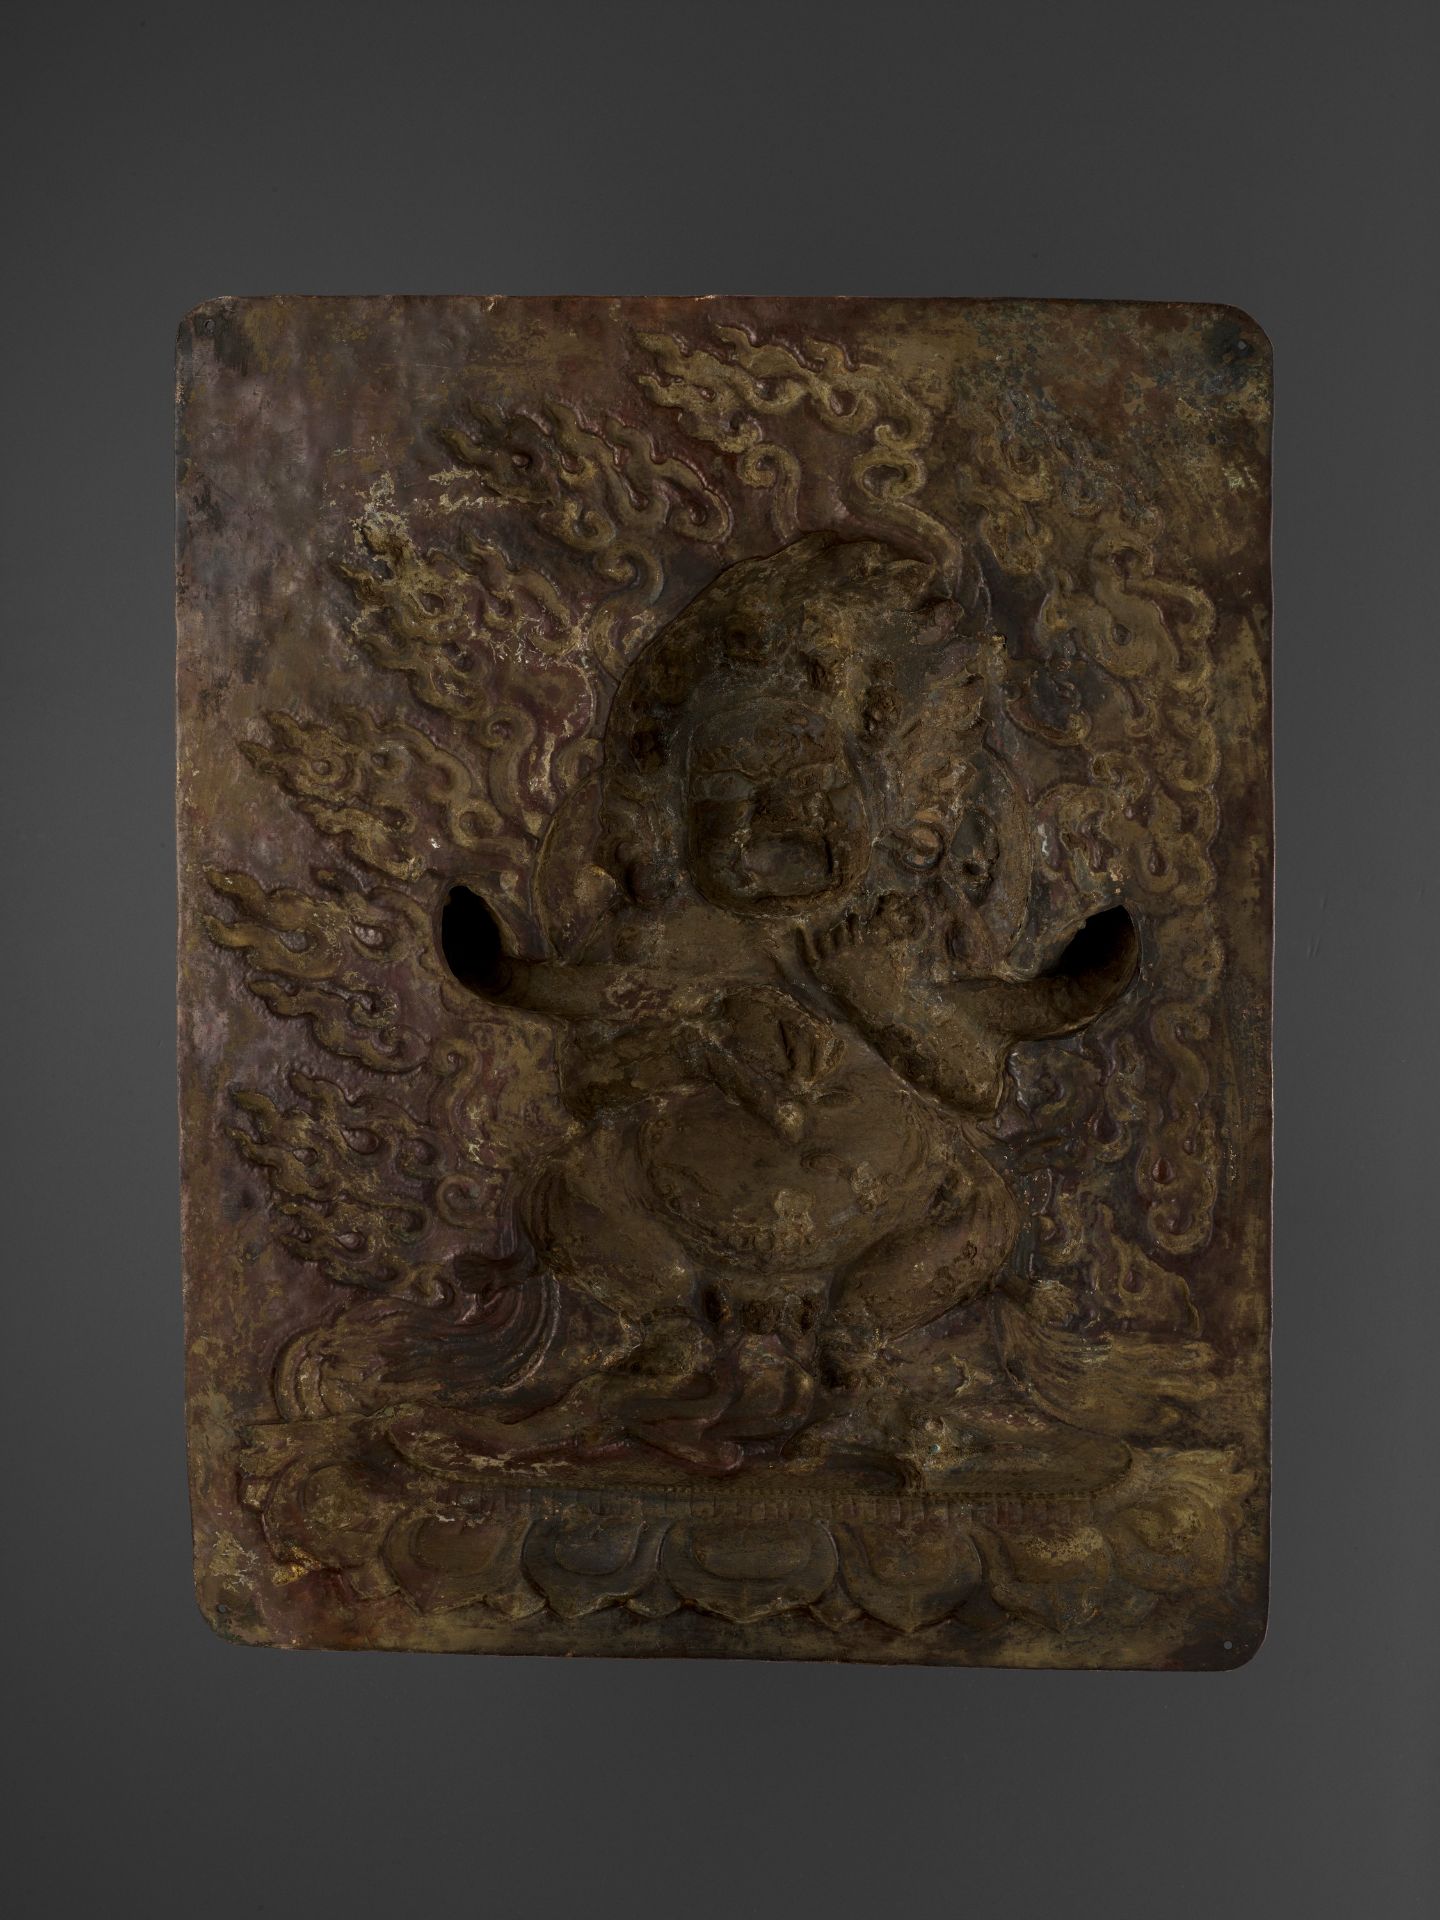 A LARGE GILT-COPPER REPOUSSE RELIEF OF MAHAKALA, 18TH-19TH CENTURY - Image 8 of 8